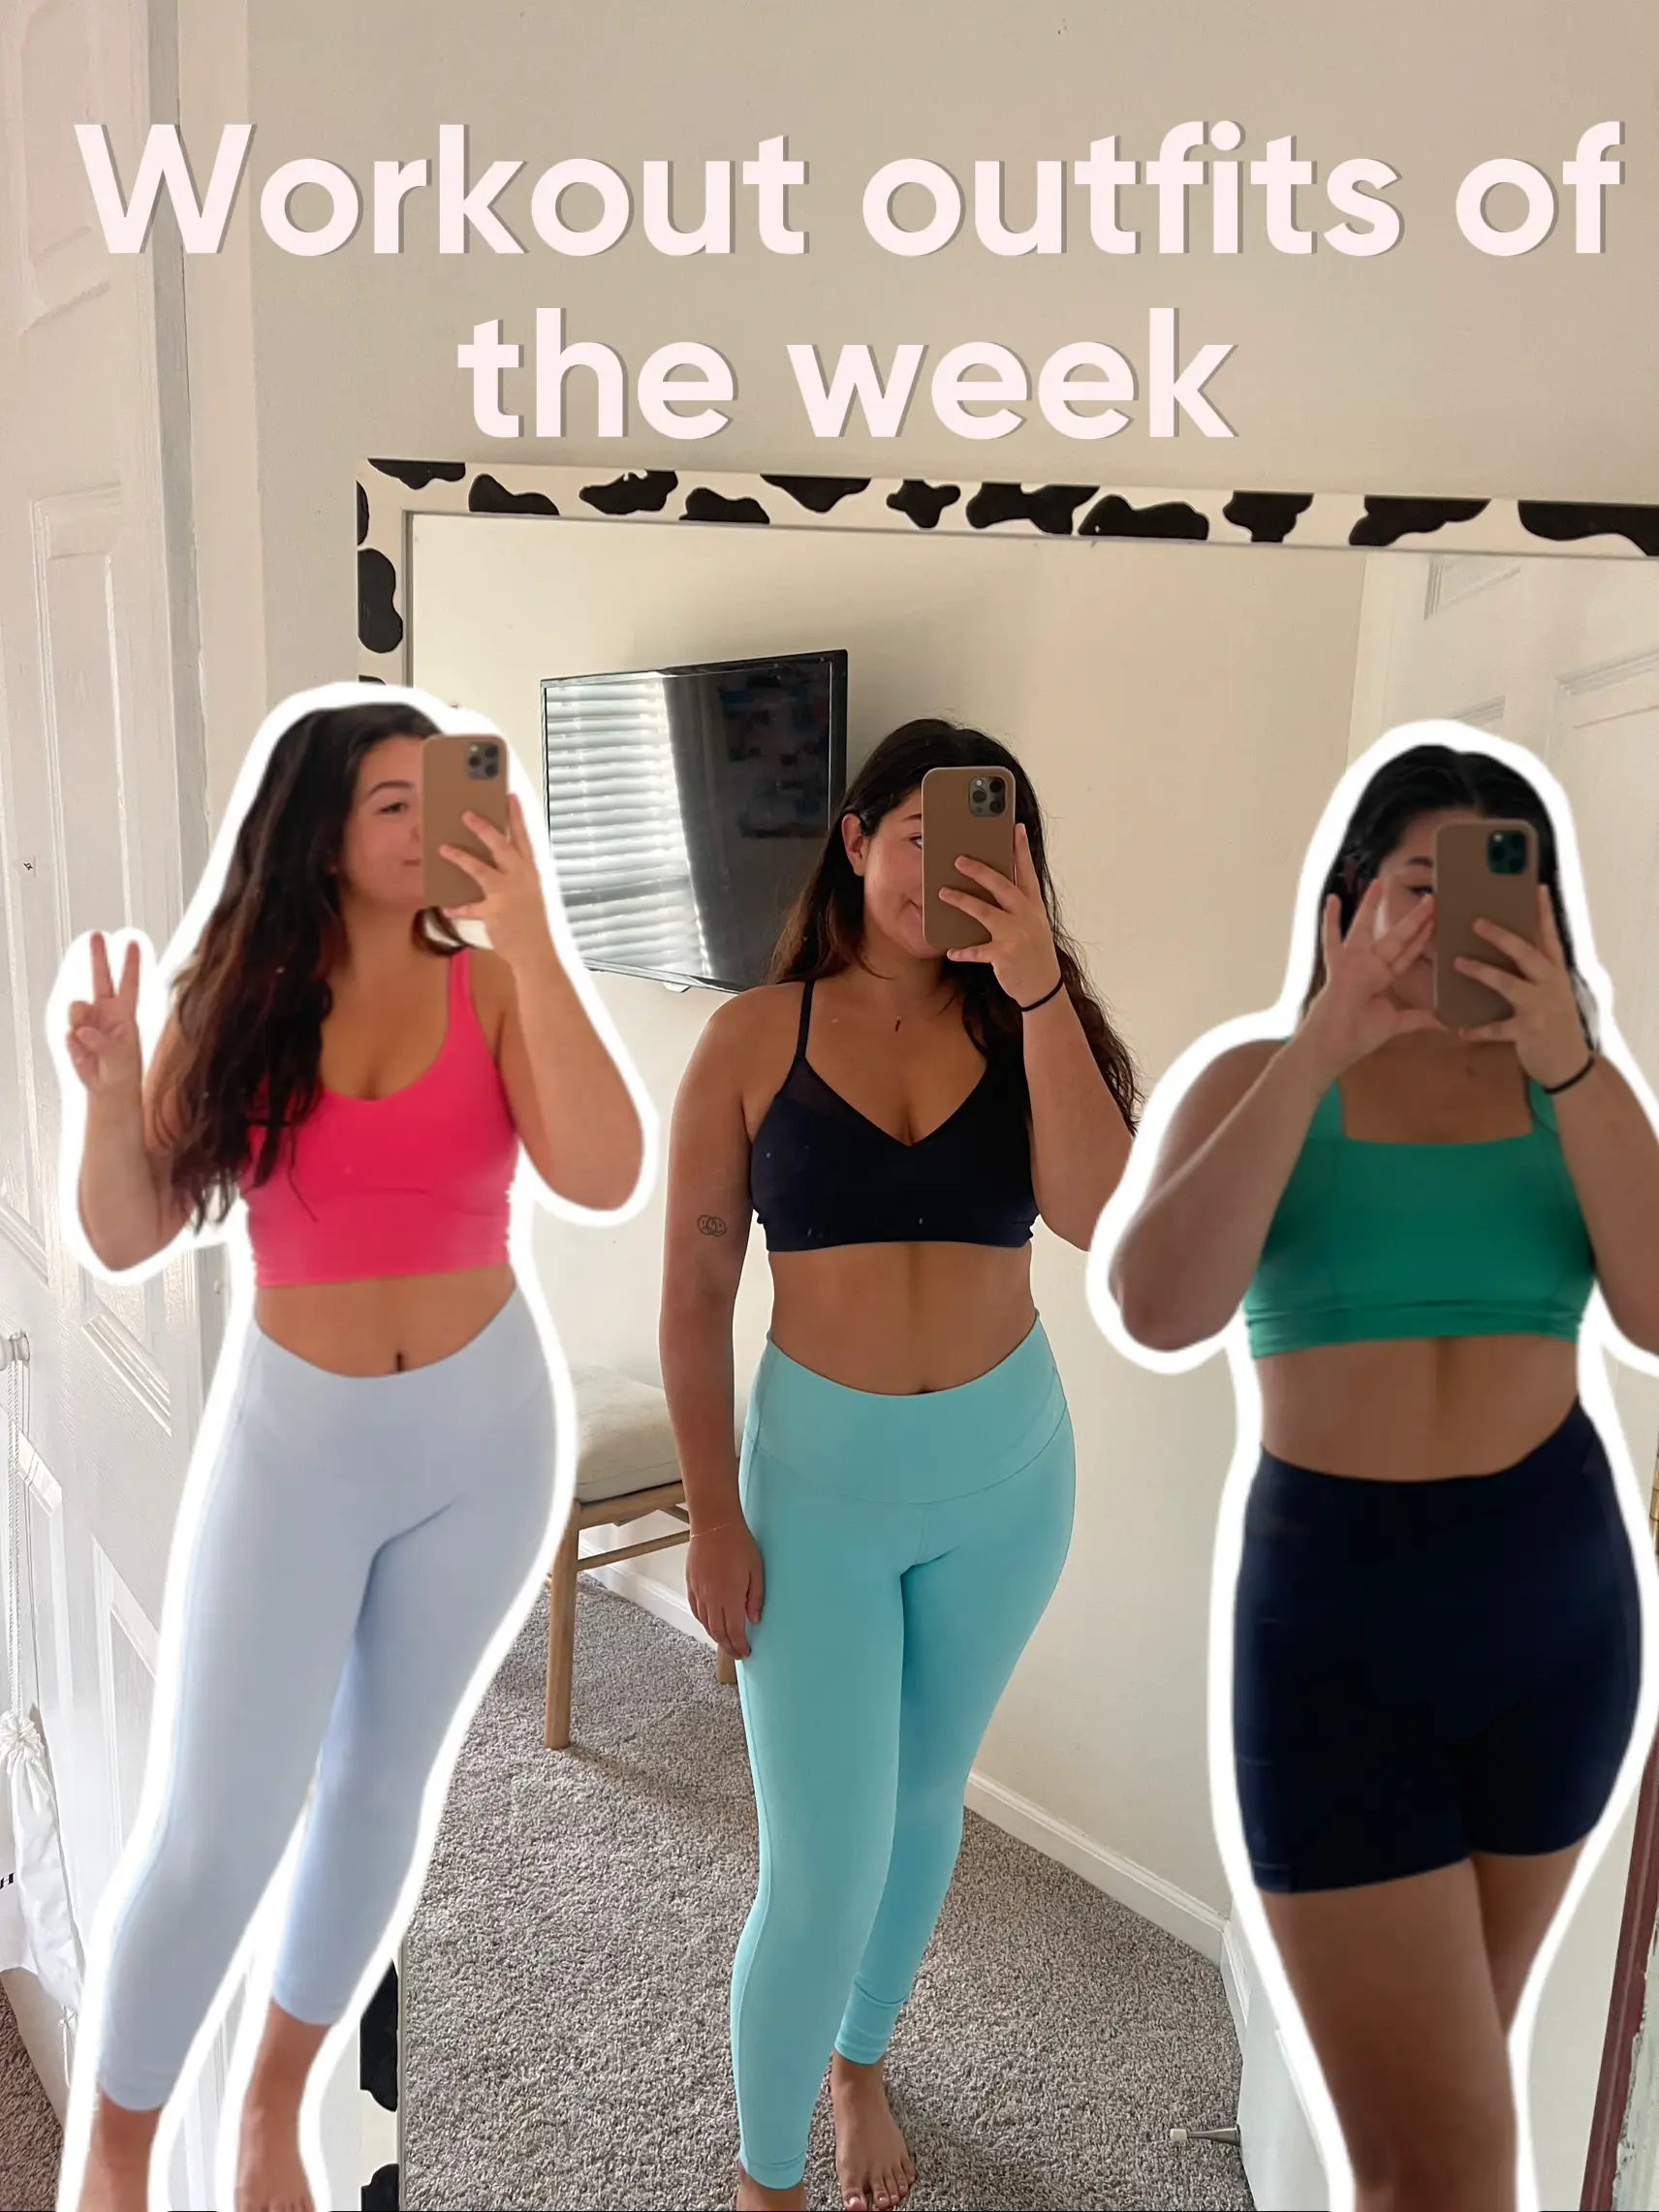 Recent Gym Outfits 👟, Gallery posted by Michelle